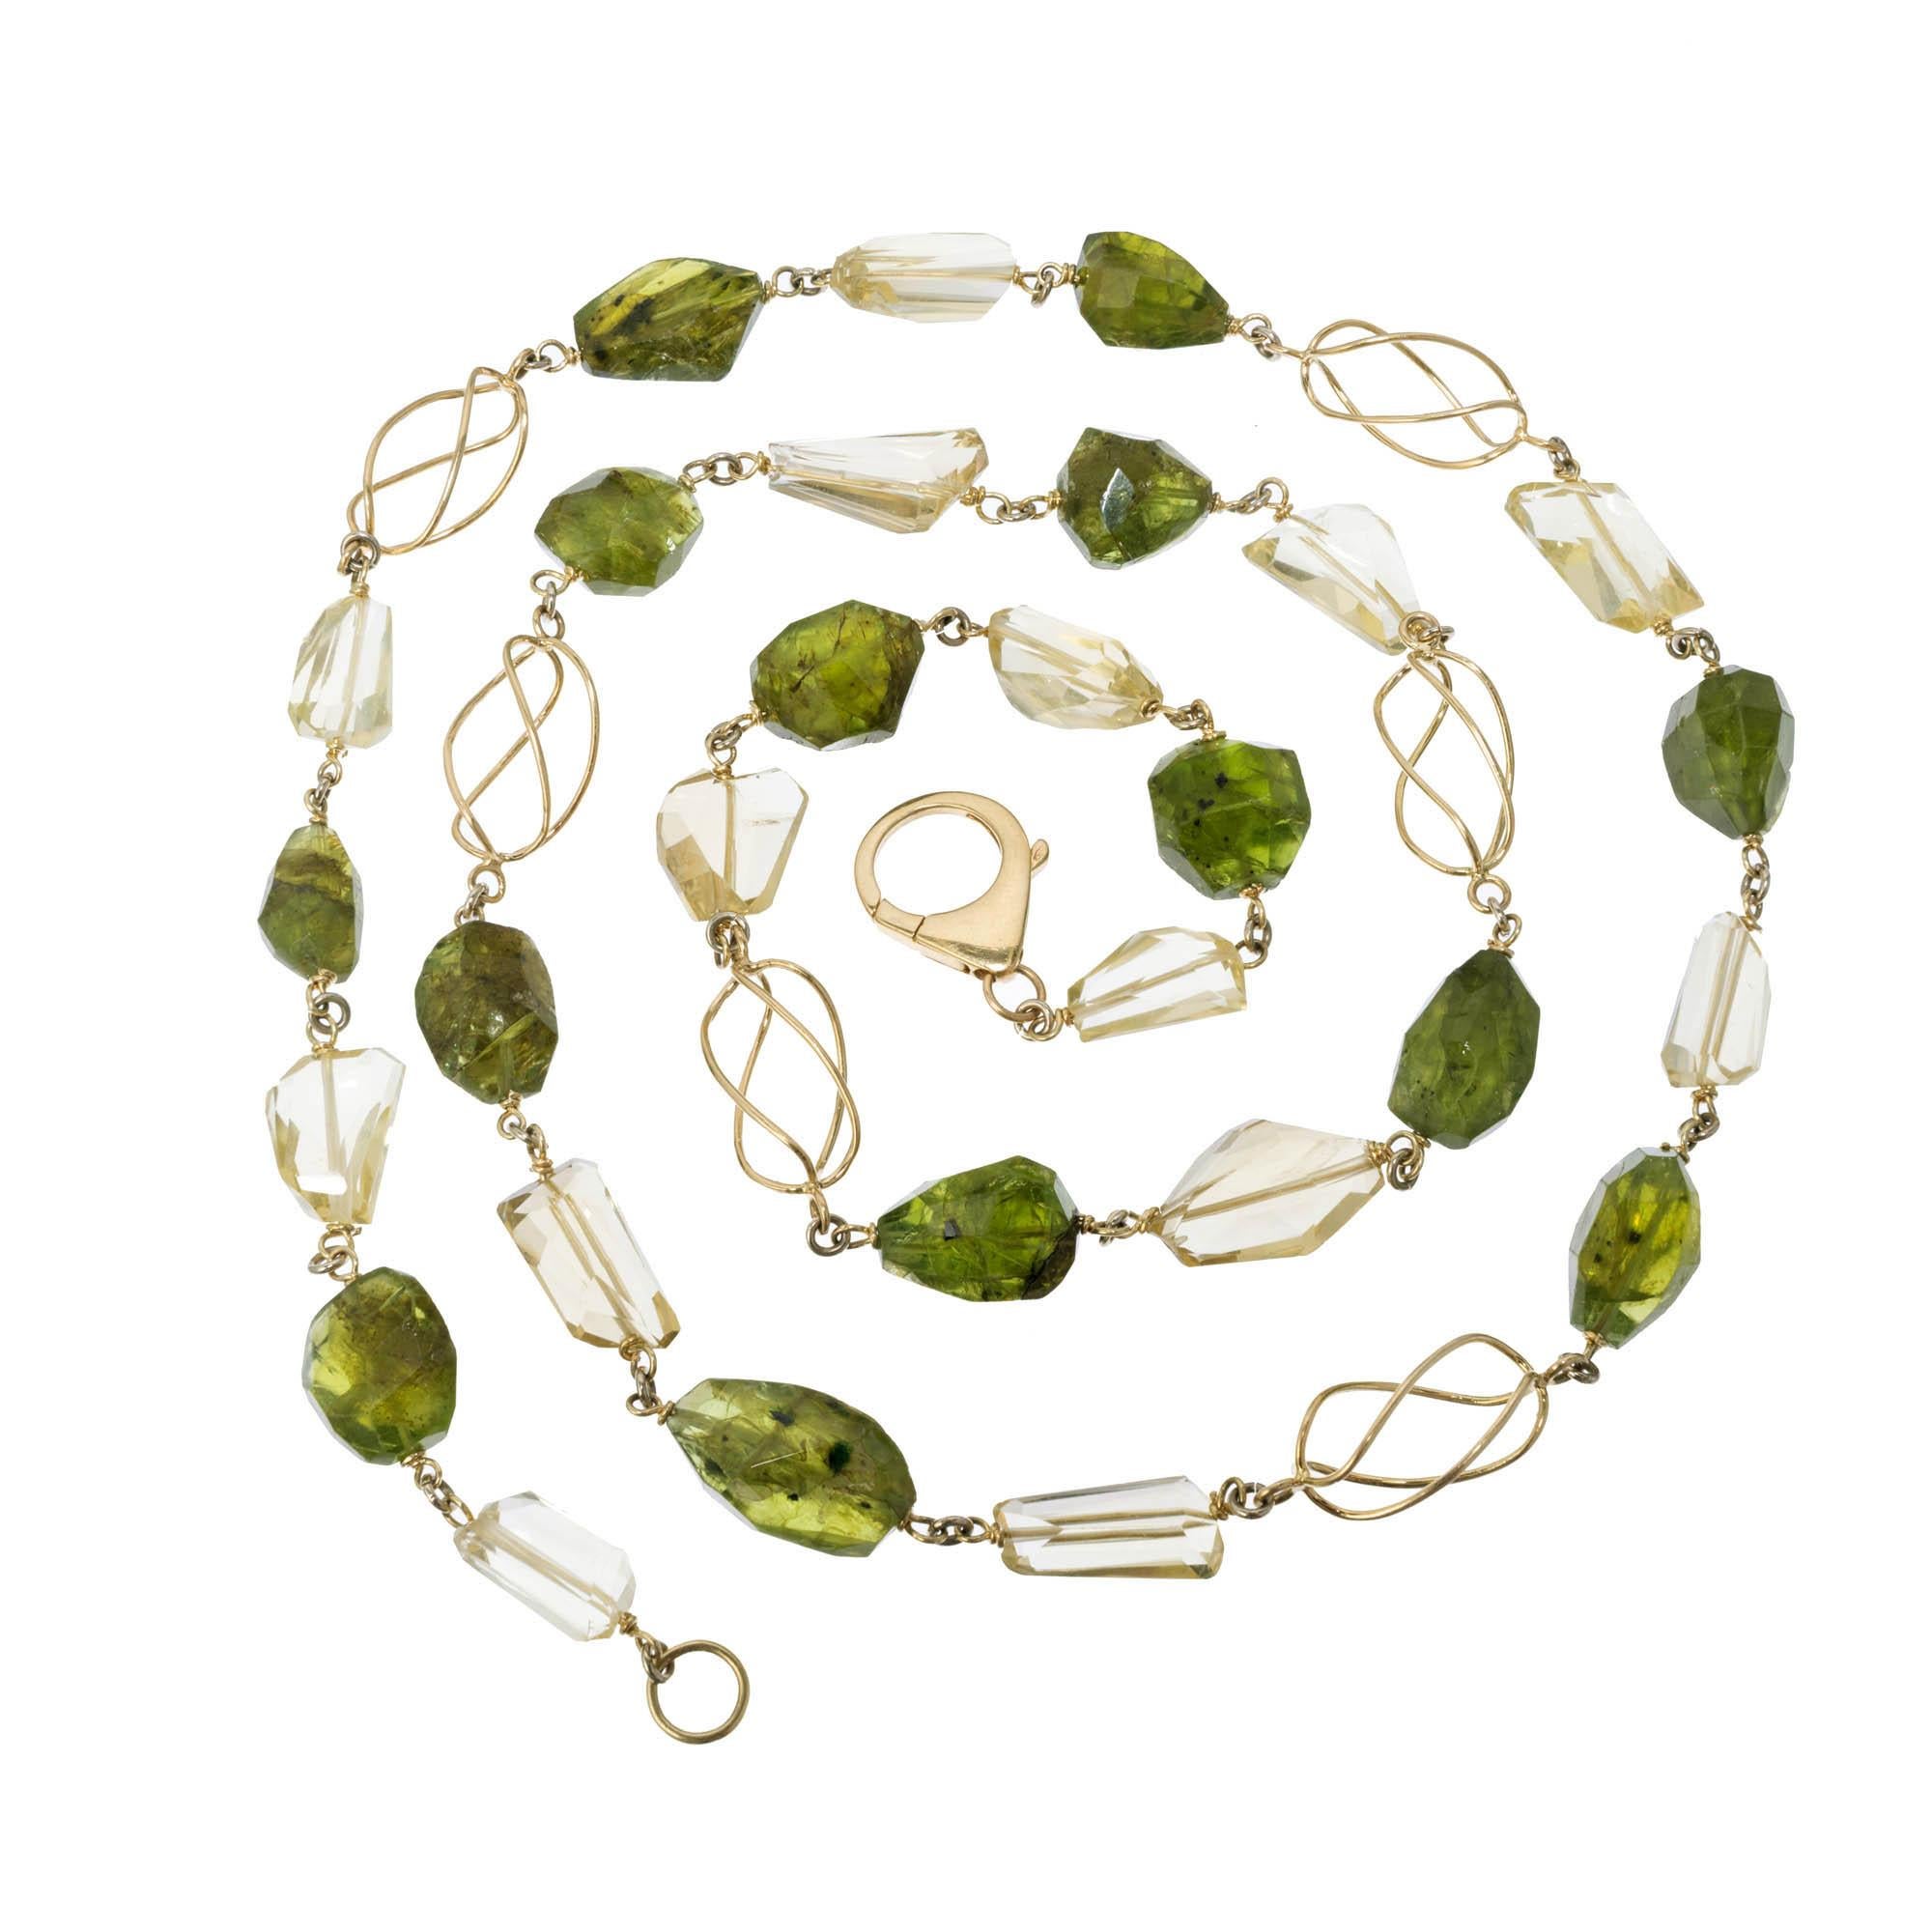 GIA Certified 330.00 Carat Peridot Citrine Freeform Gold Beaded Chain Necklace